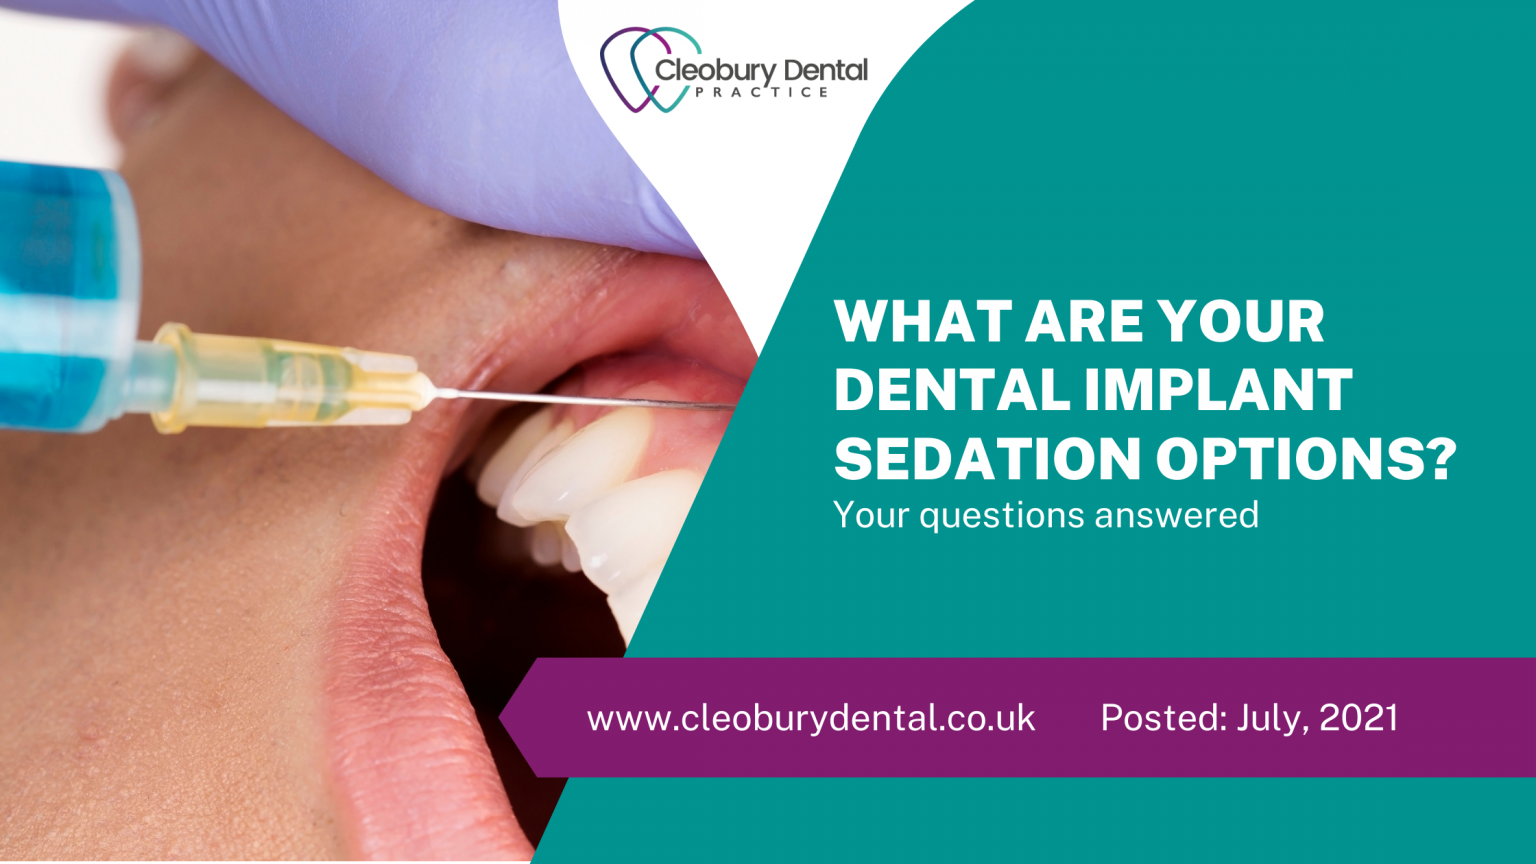 What Are Your Dental Implant Sedation Options?